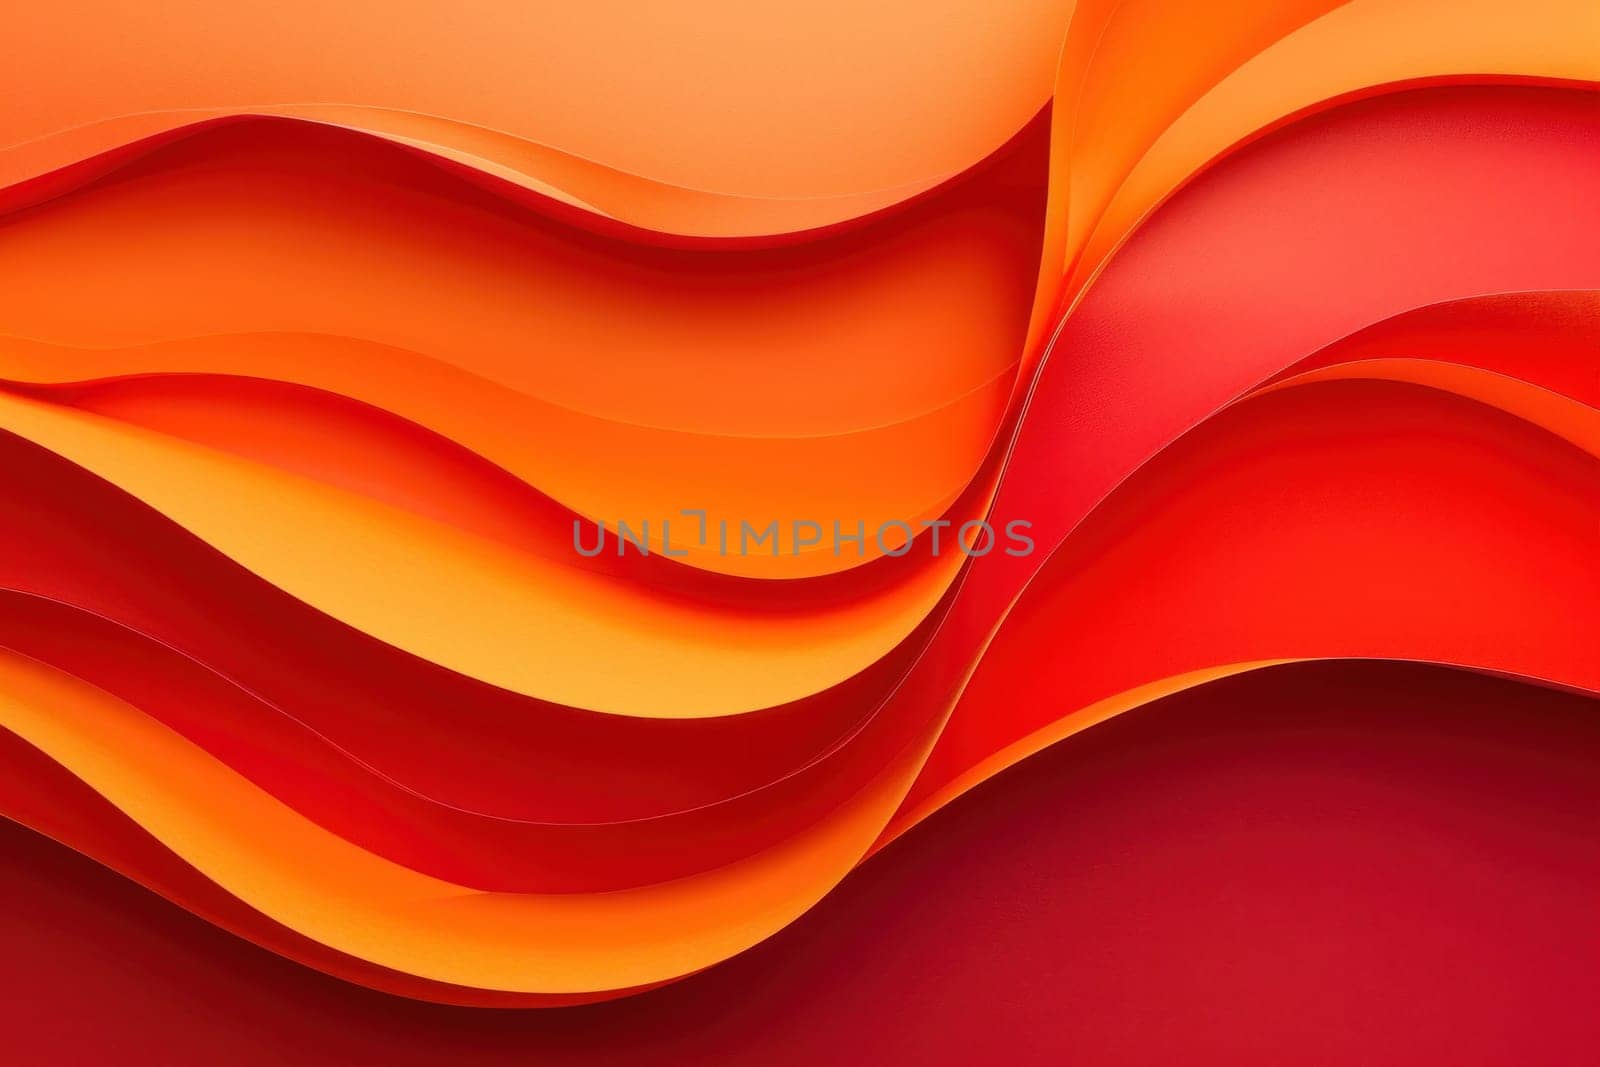 Abstract red wave design with copy space for text on red background for travel, art, and fashion concepts